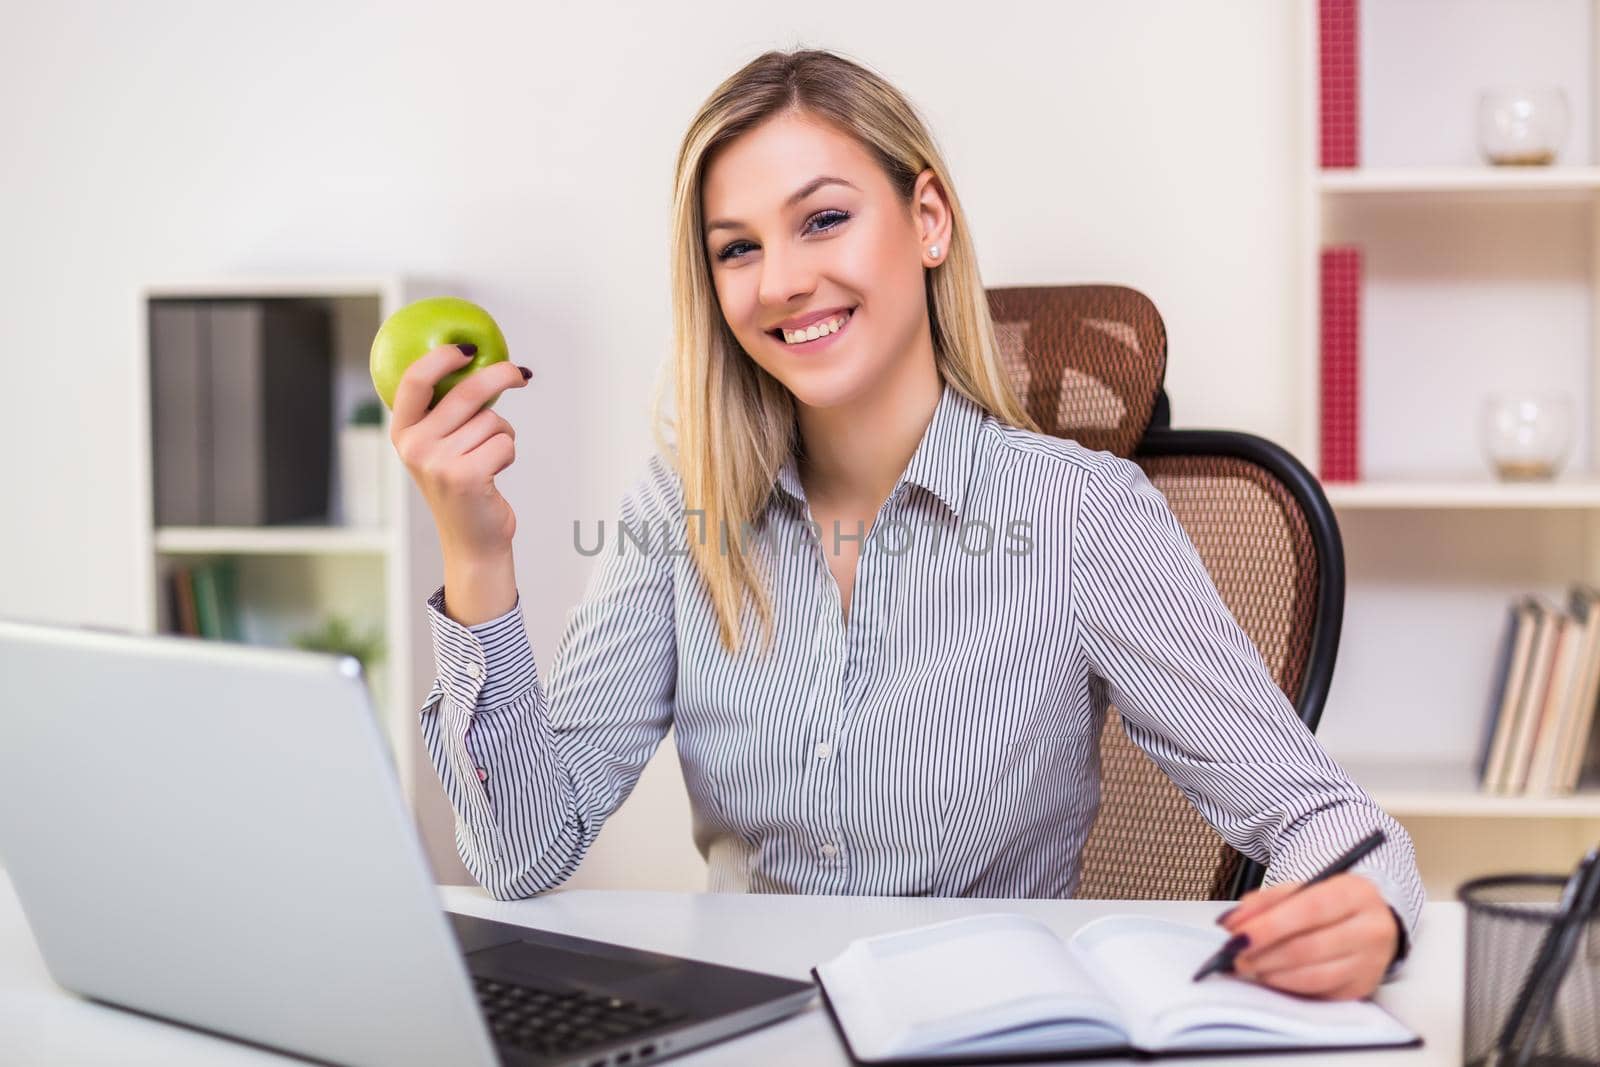 Businesswoman eating apple while working in her office.